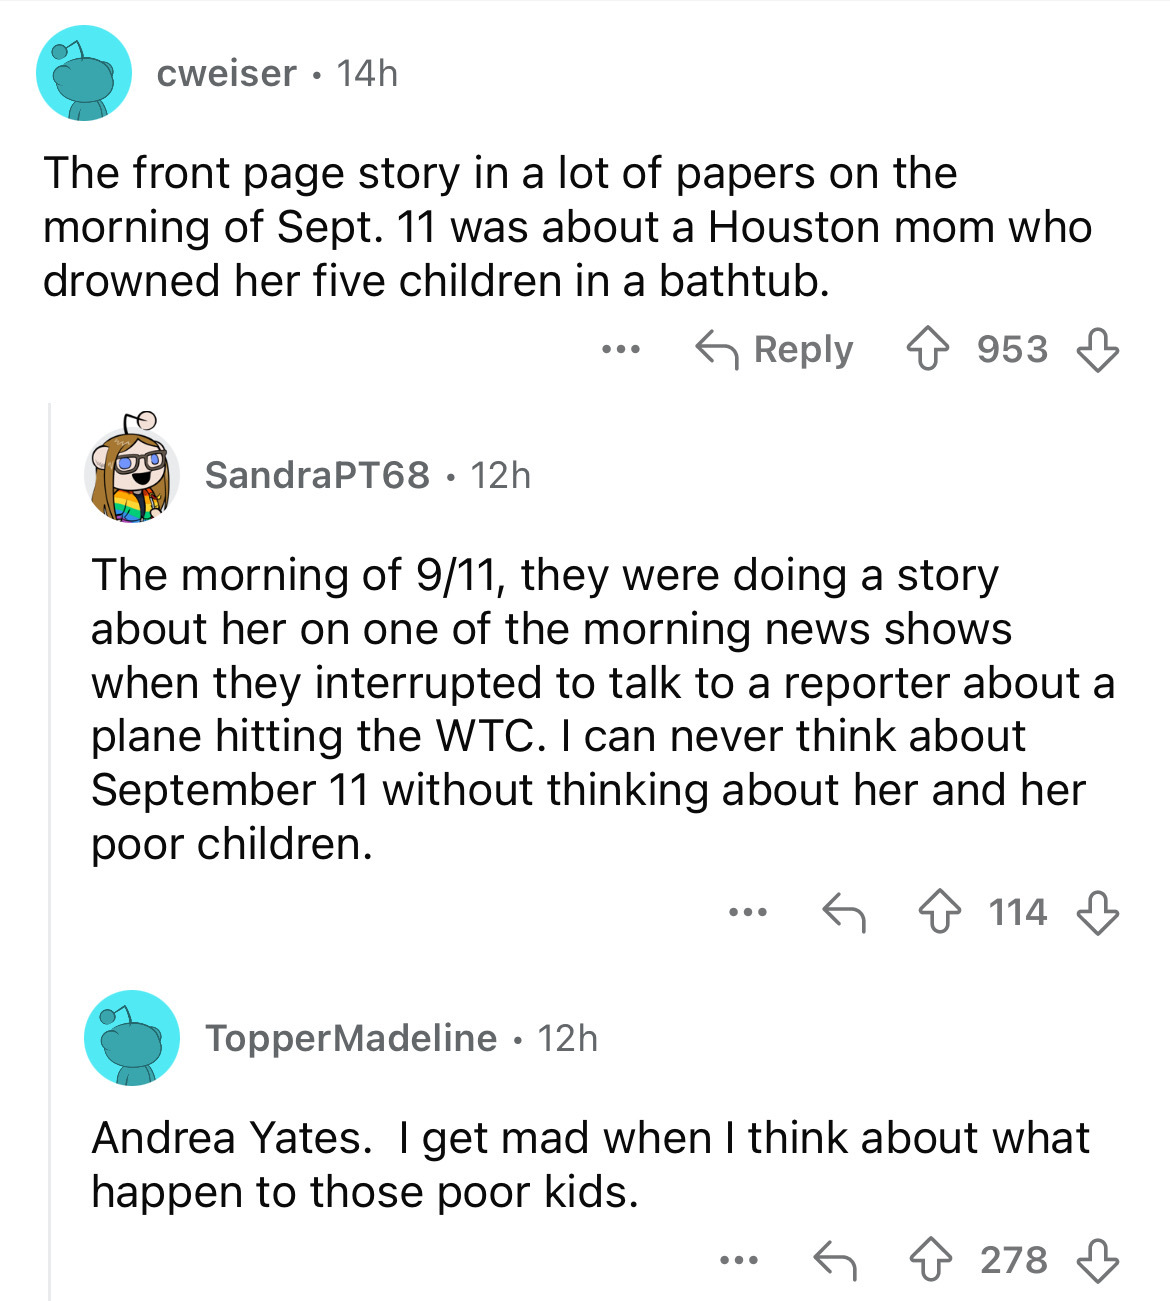 screenshot - cweiser 14h The front page story in a lot of papers on the morning of Sept. 11 was about a Houston mom who drowned her five children in a bathtub. Sandra PT68 12h . ... 953 The morning of 911, they were doing a story about her on one of the m